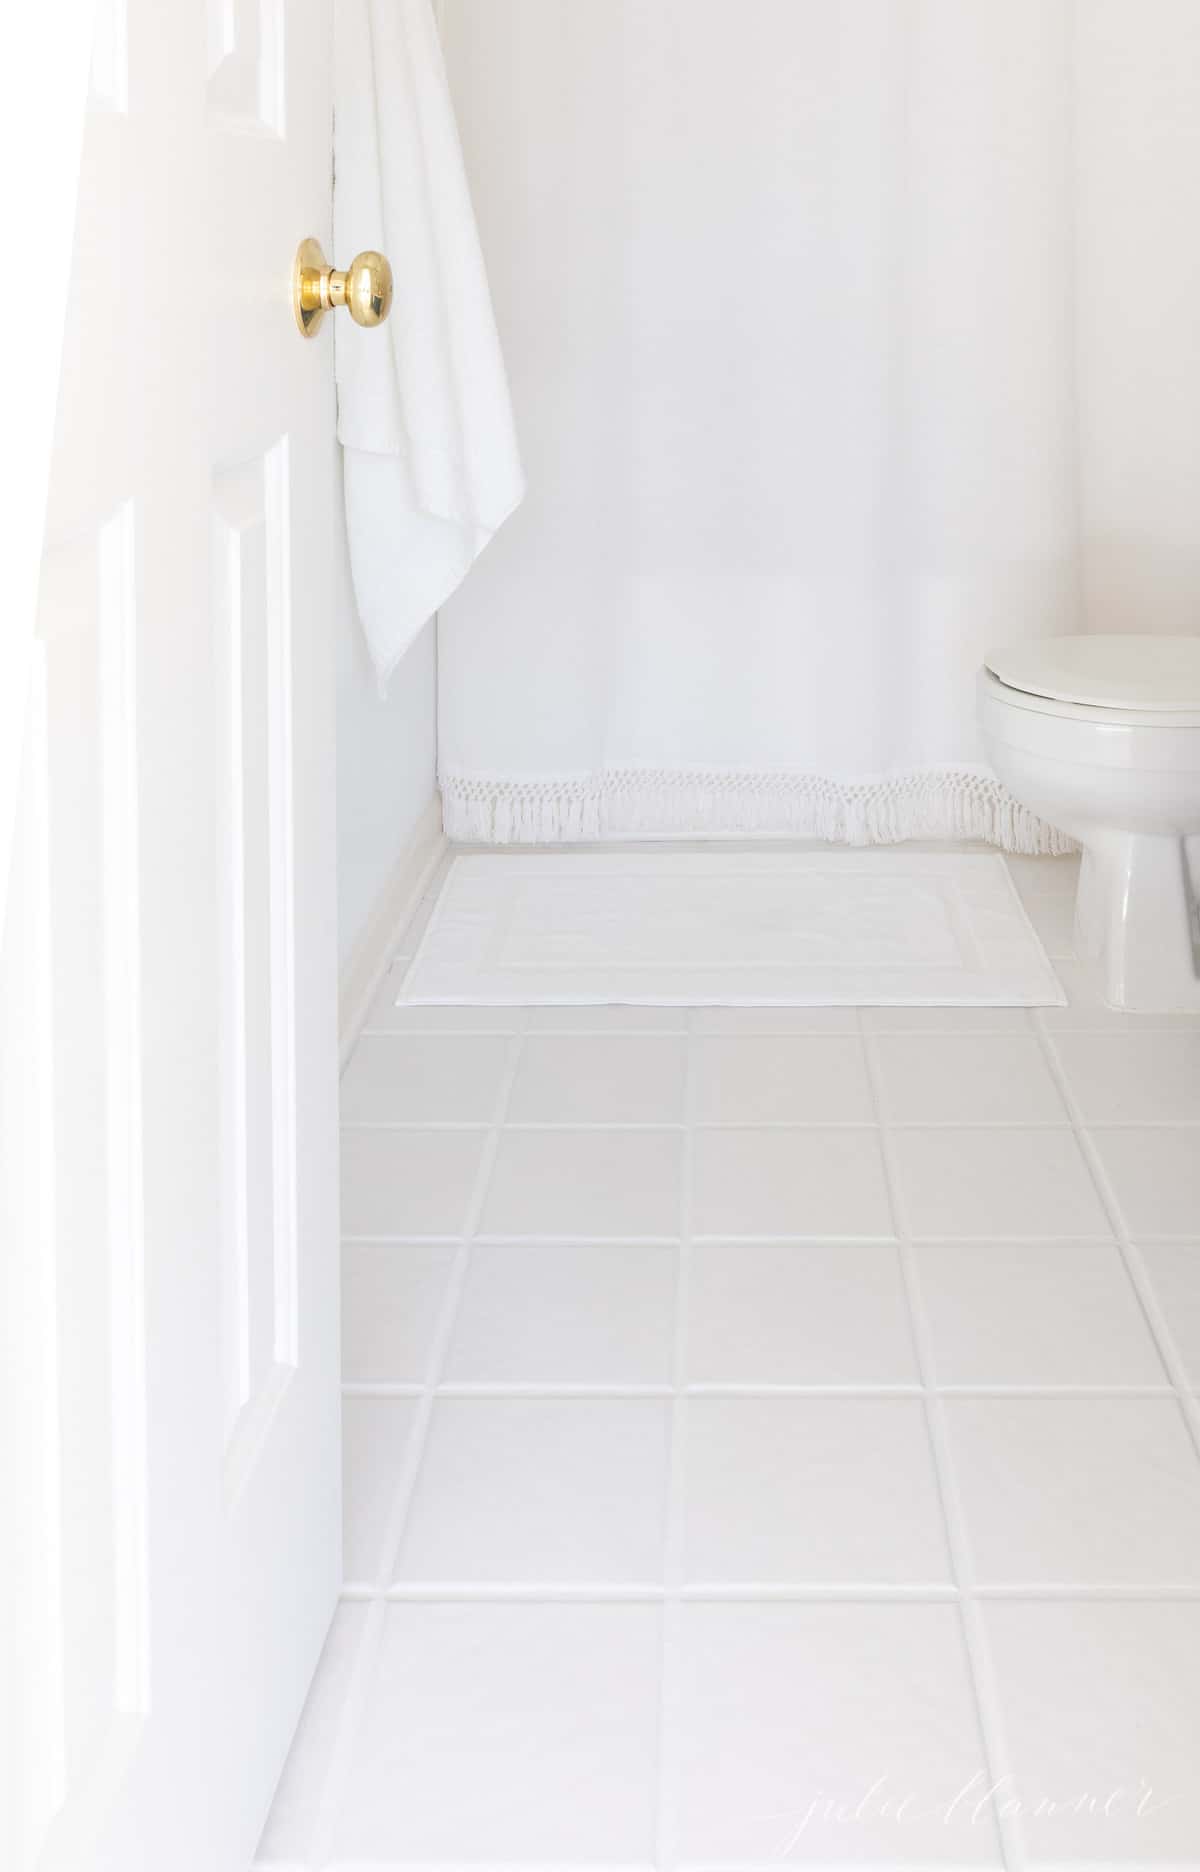 WHITE BATHROOM WITH WHITE TILE AND TILE GROUT